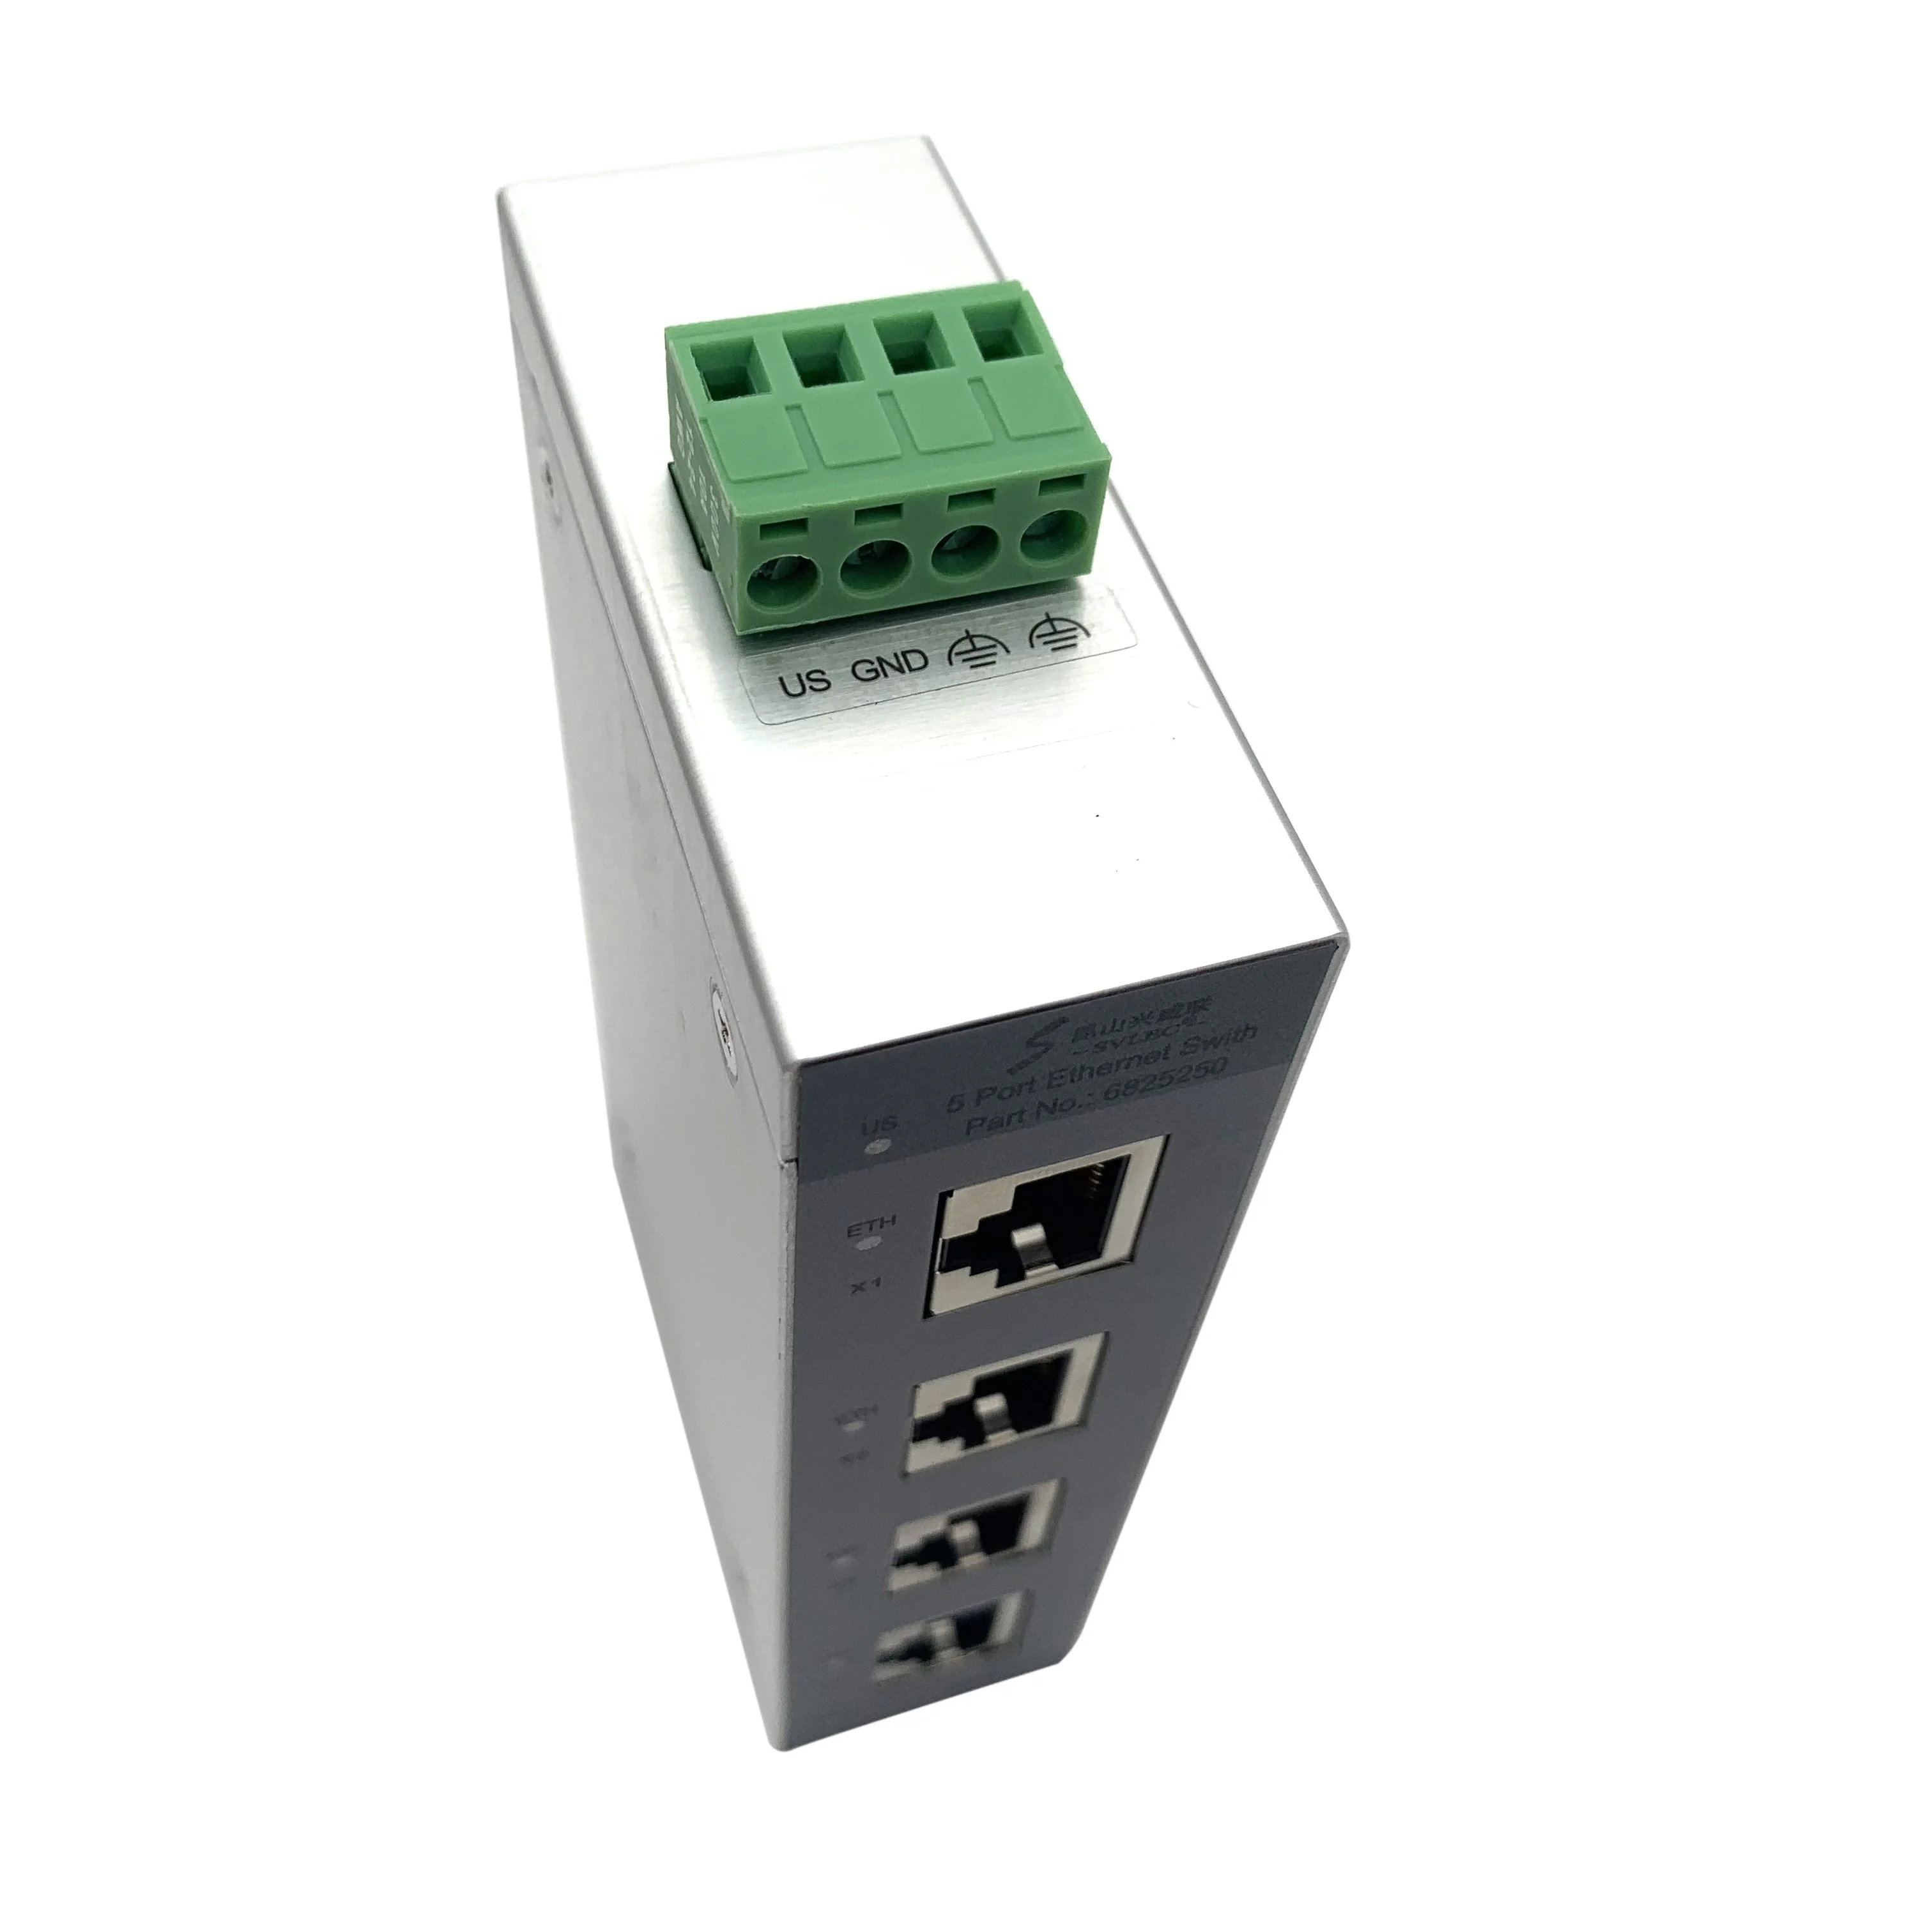 SVLEC industrial network switches with 5 ports  RJ45 entries optical